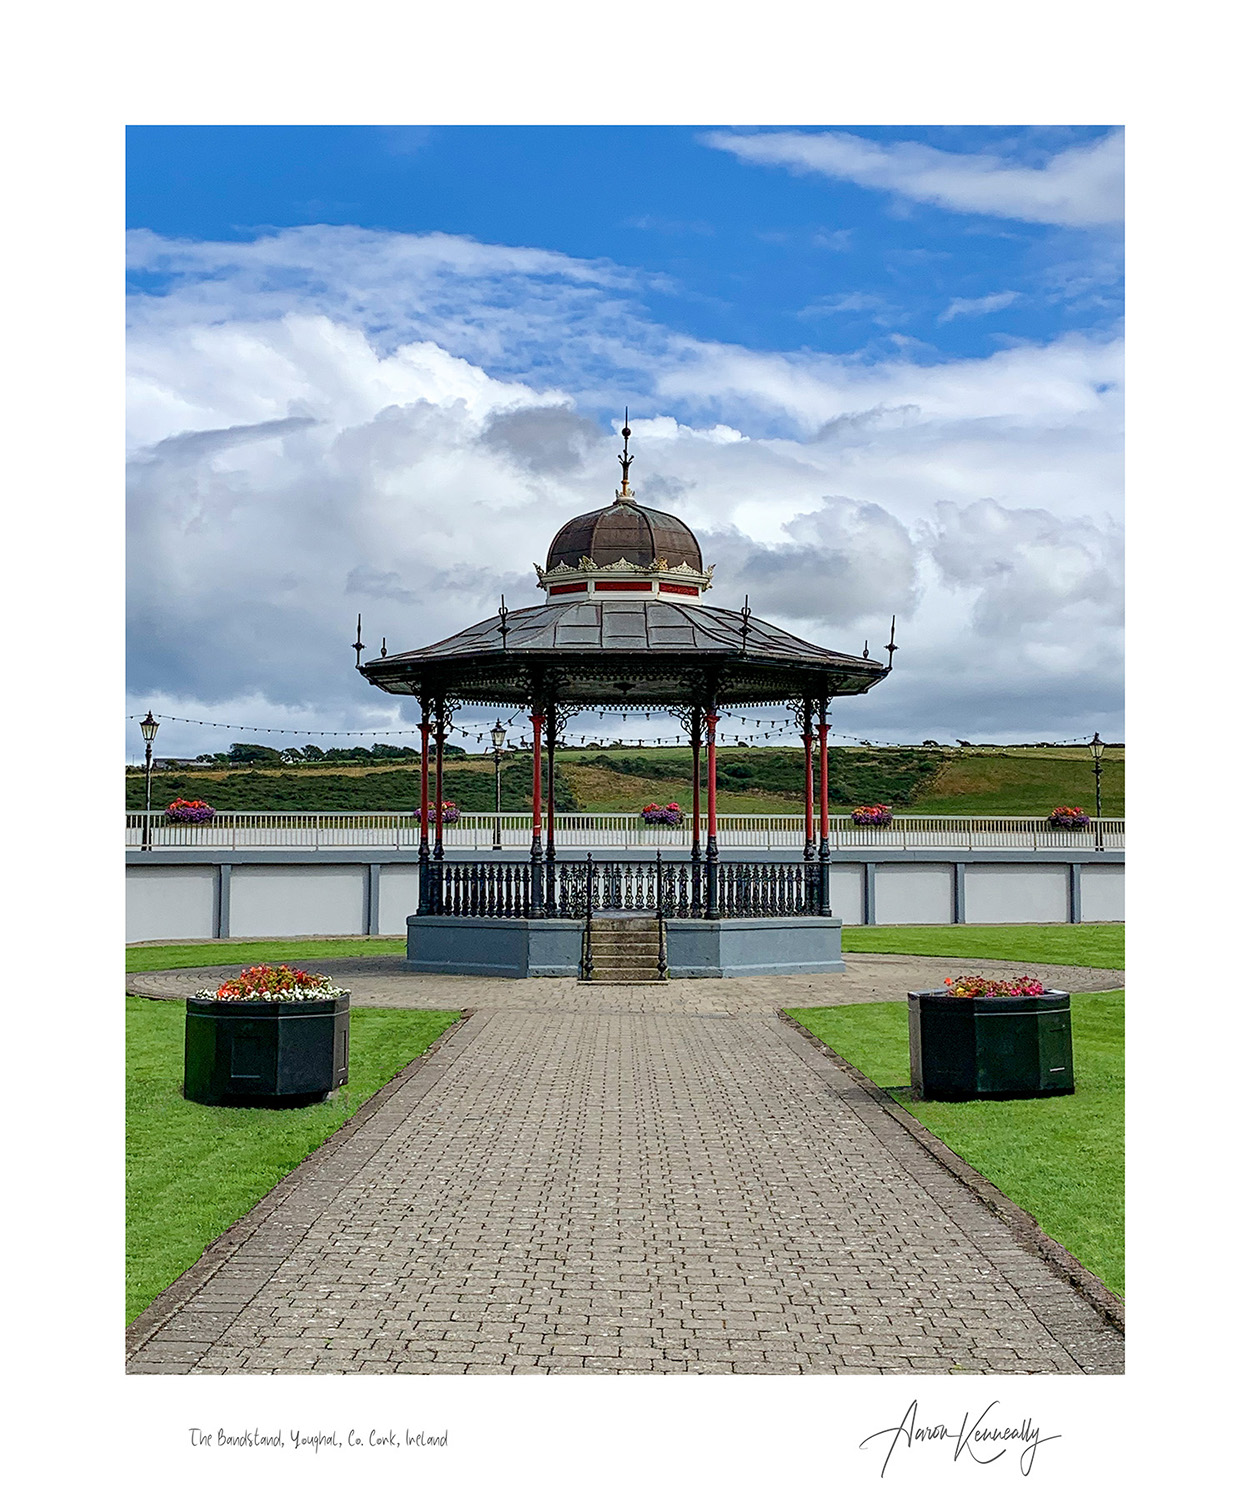 The Bandstand, Youghal, Co. Cork, Ireland